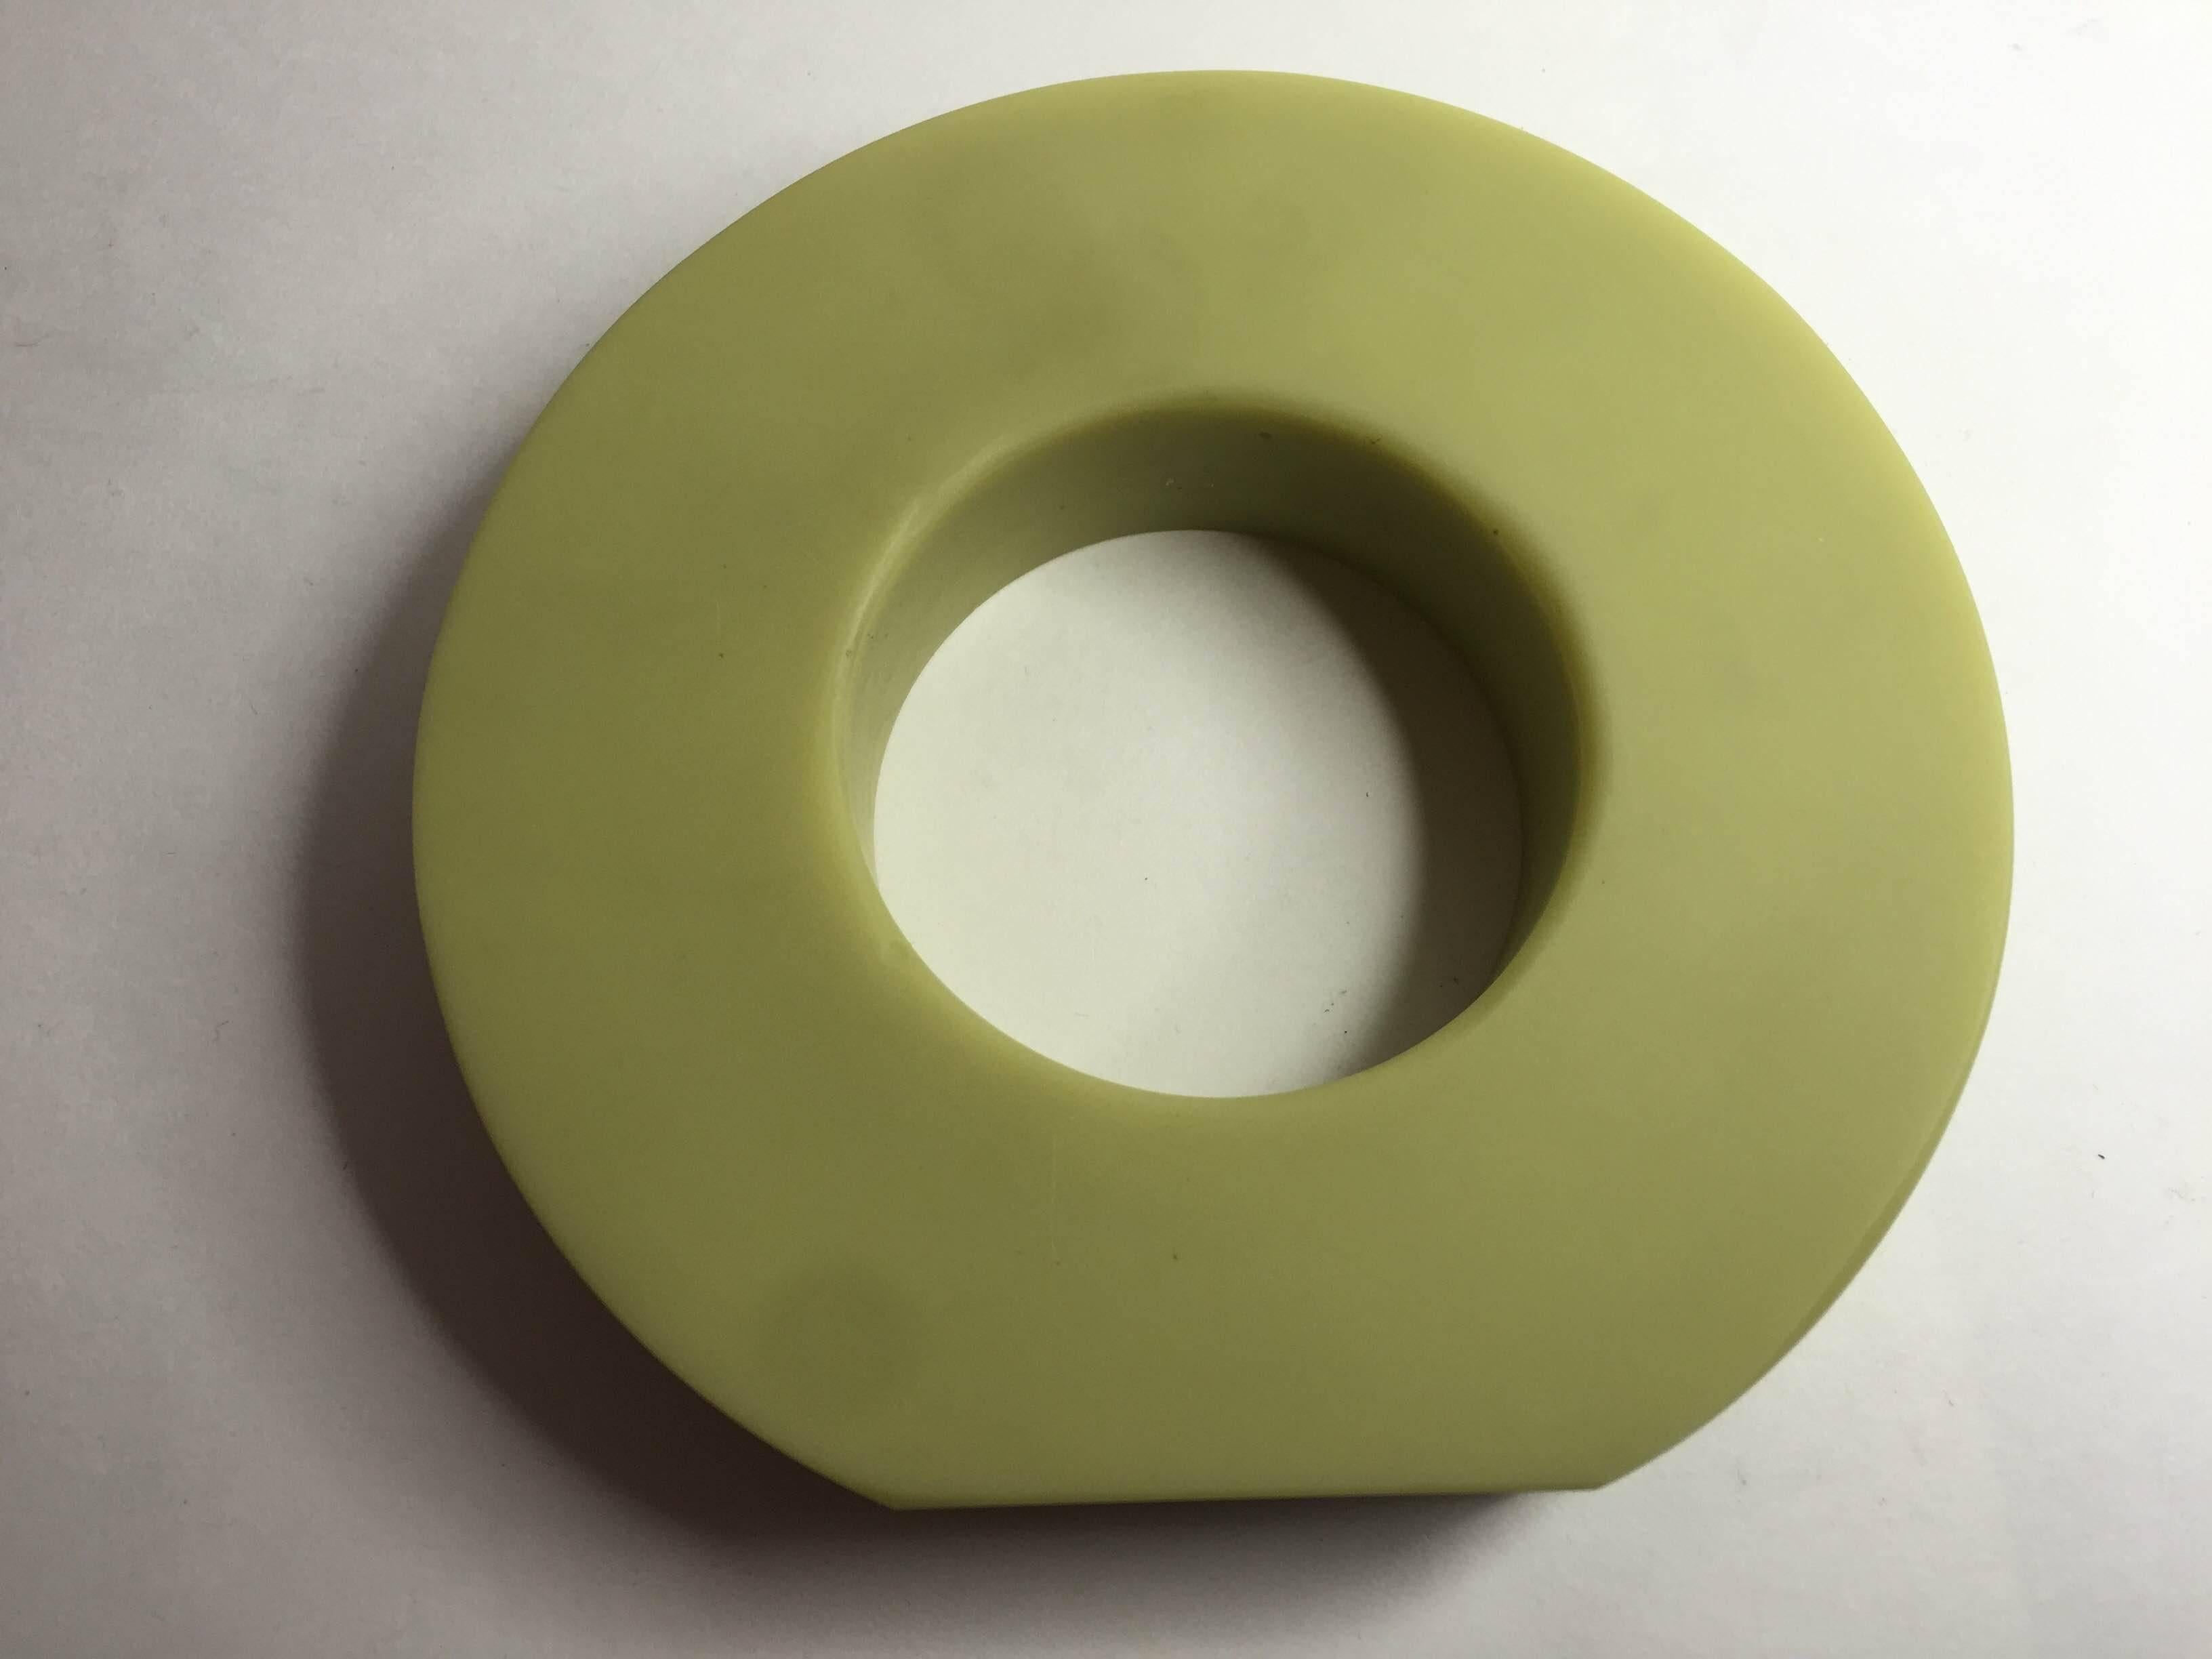 An important sculptural work of art, this resin bangle bracelet by artist and designer Martha Sturdy of Vancouver BC Canada is an amazing rich celadon celery green color in matte resin   It is massive.  It measures 2.4